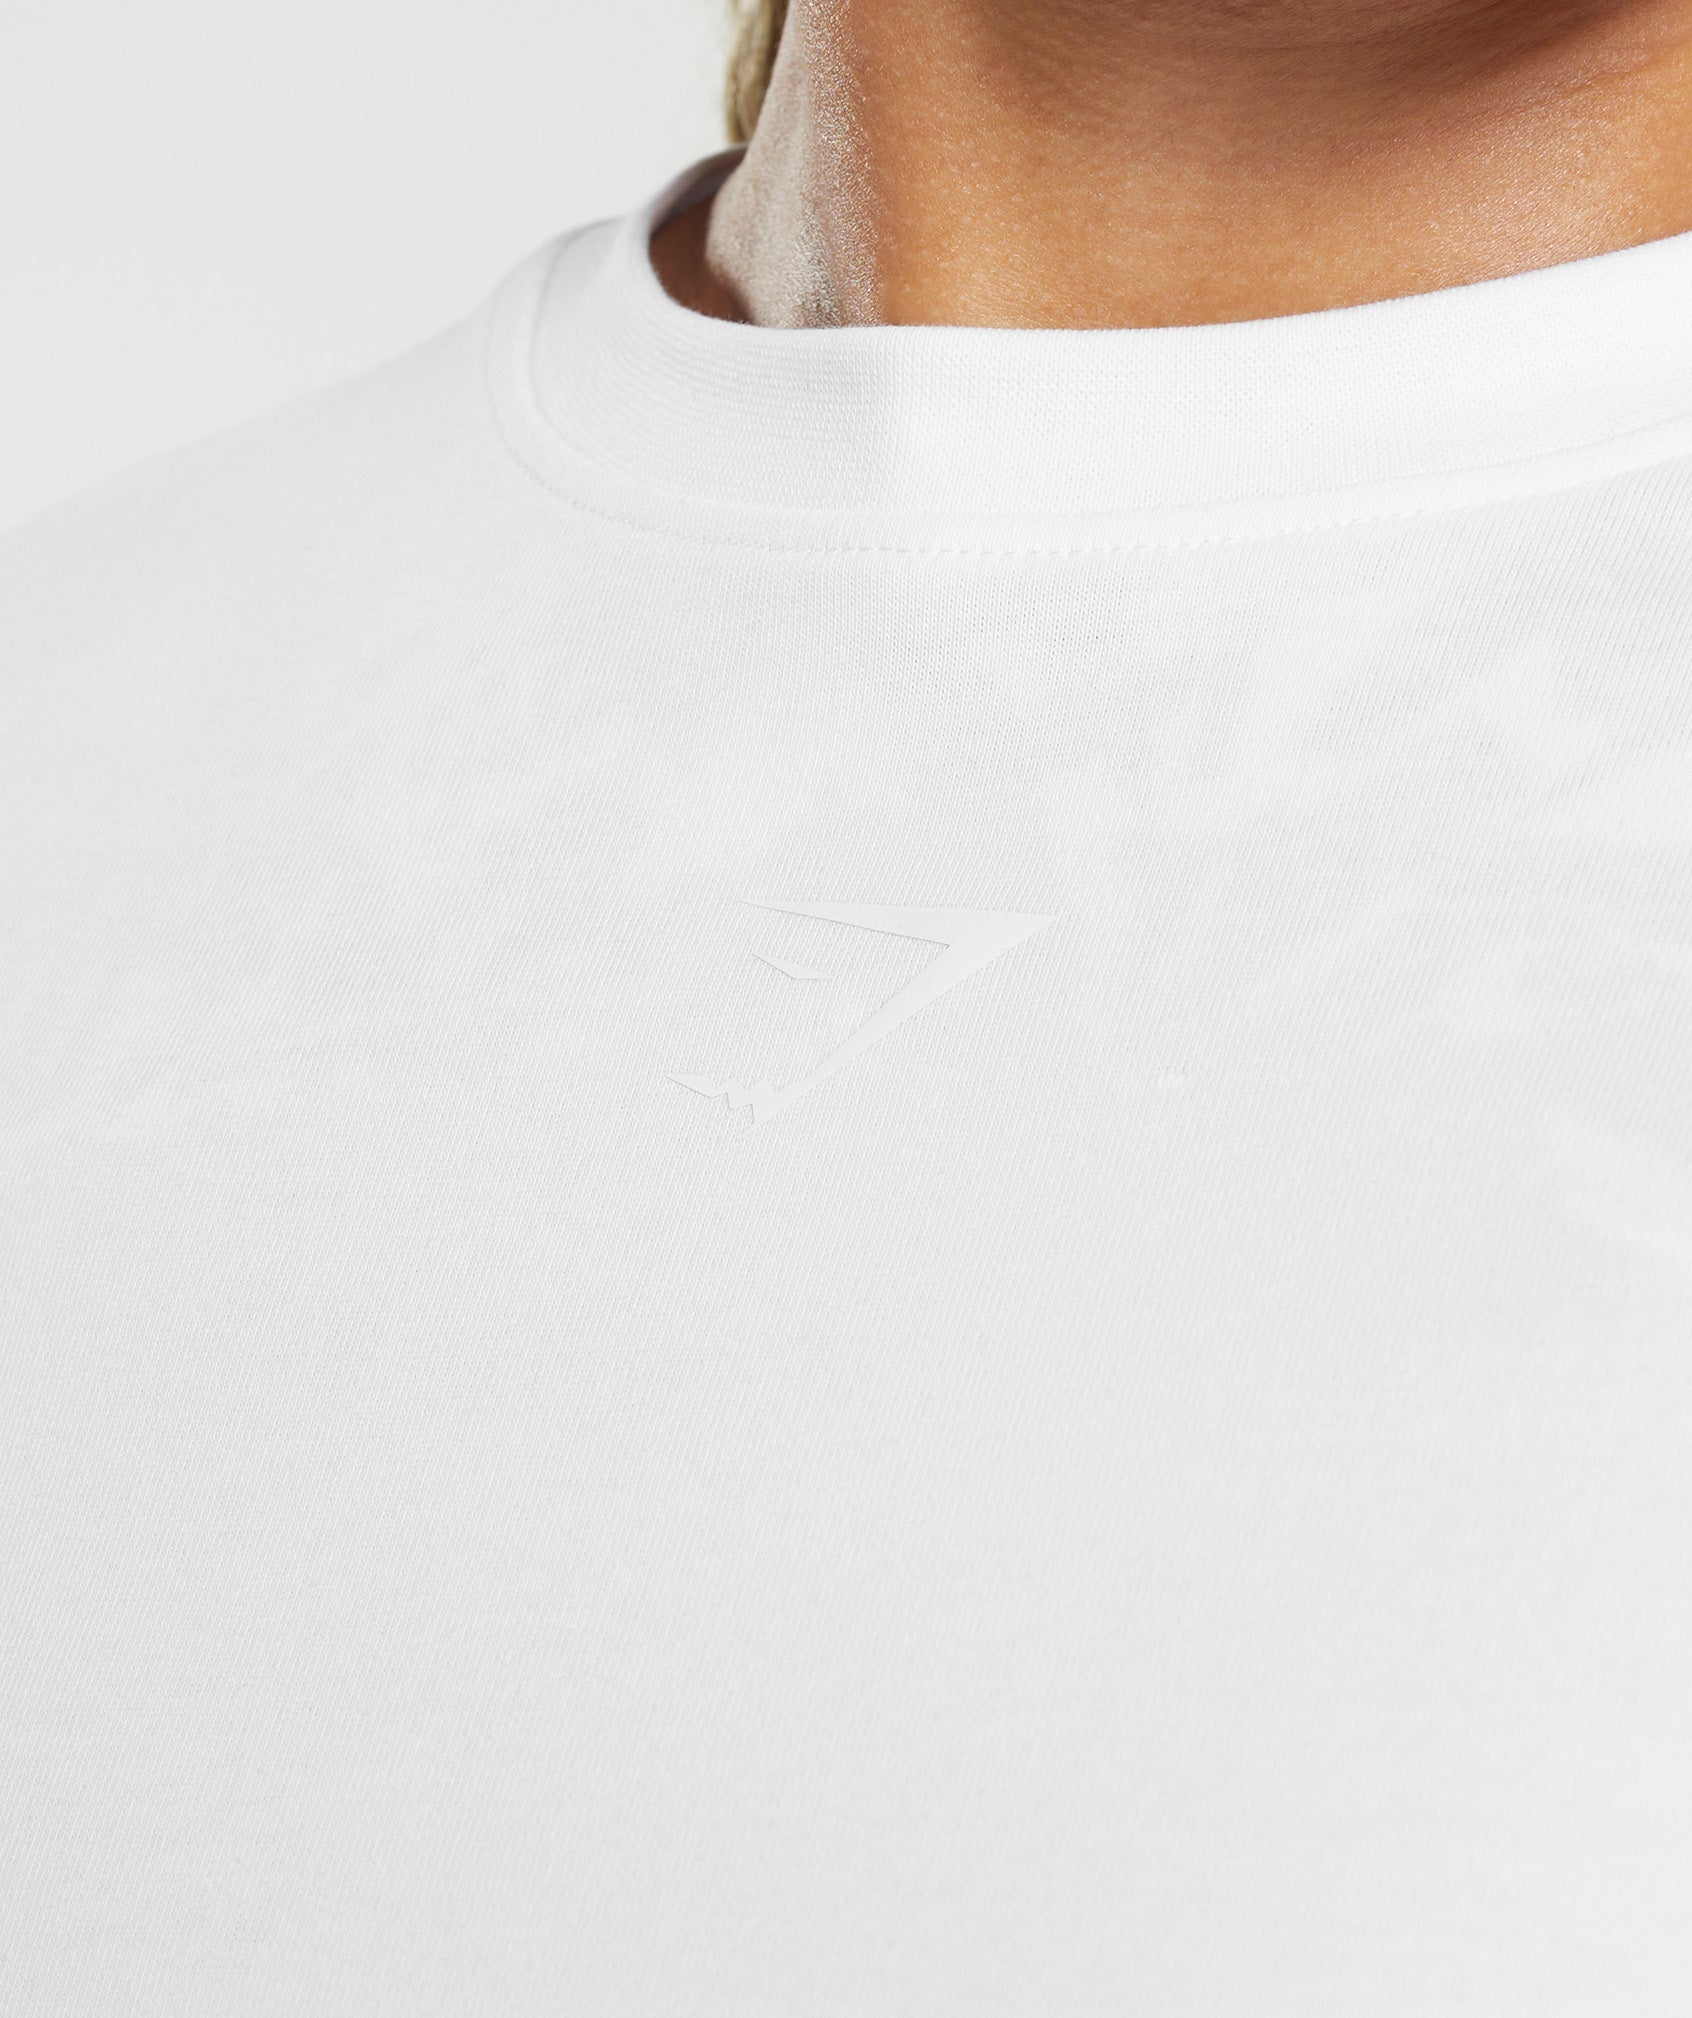 GS Power Oversized T-Shirt in White - view 5